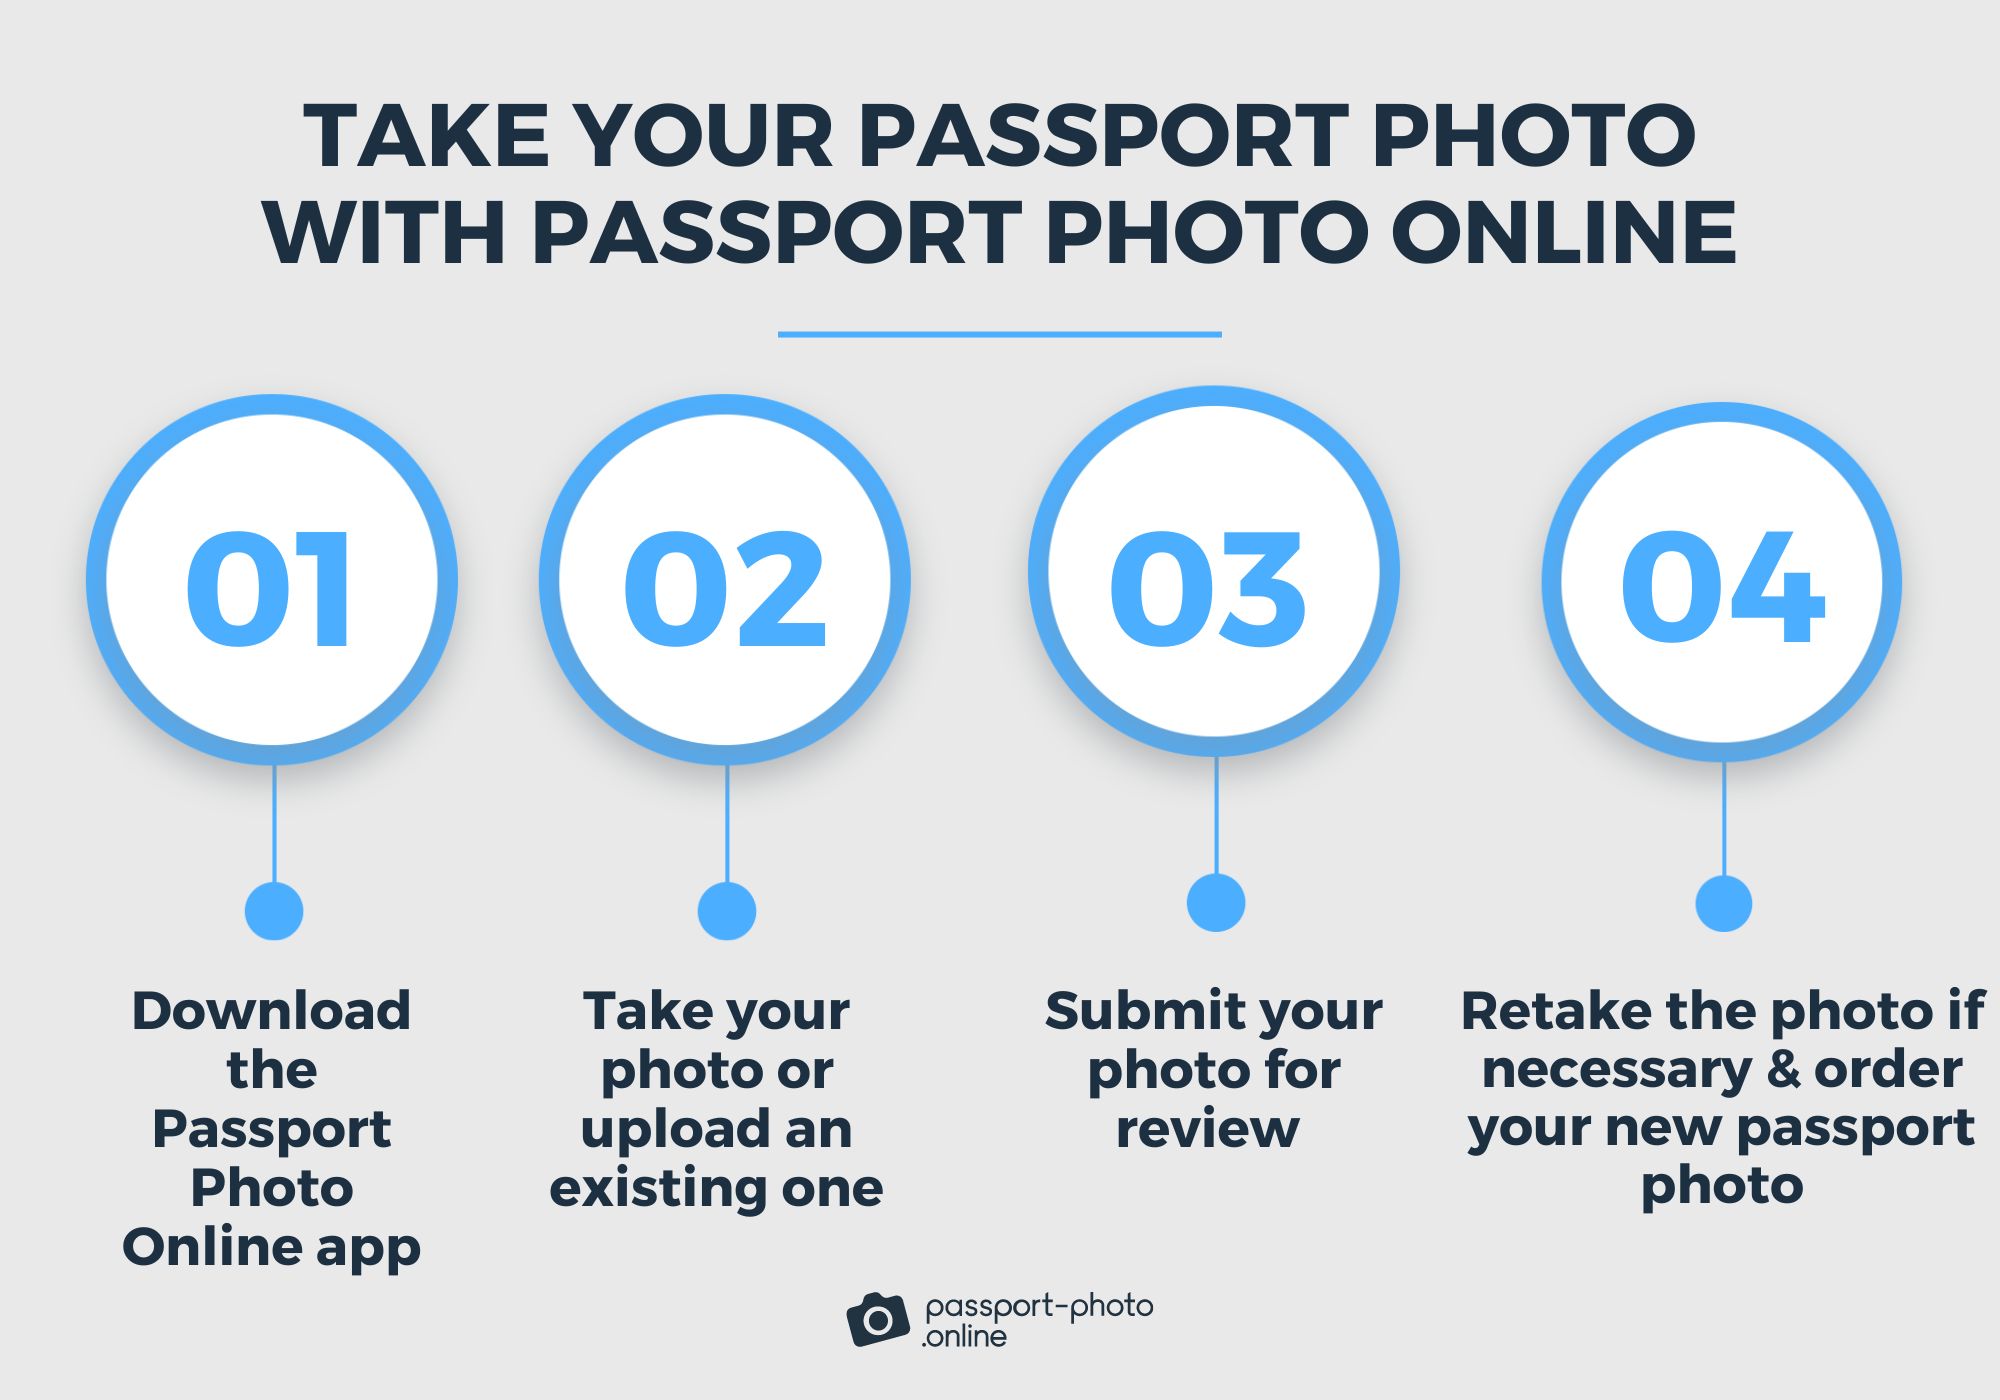 The step-by-step process of getting your passport photo with Passport Photo Online